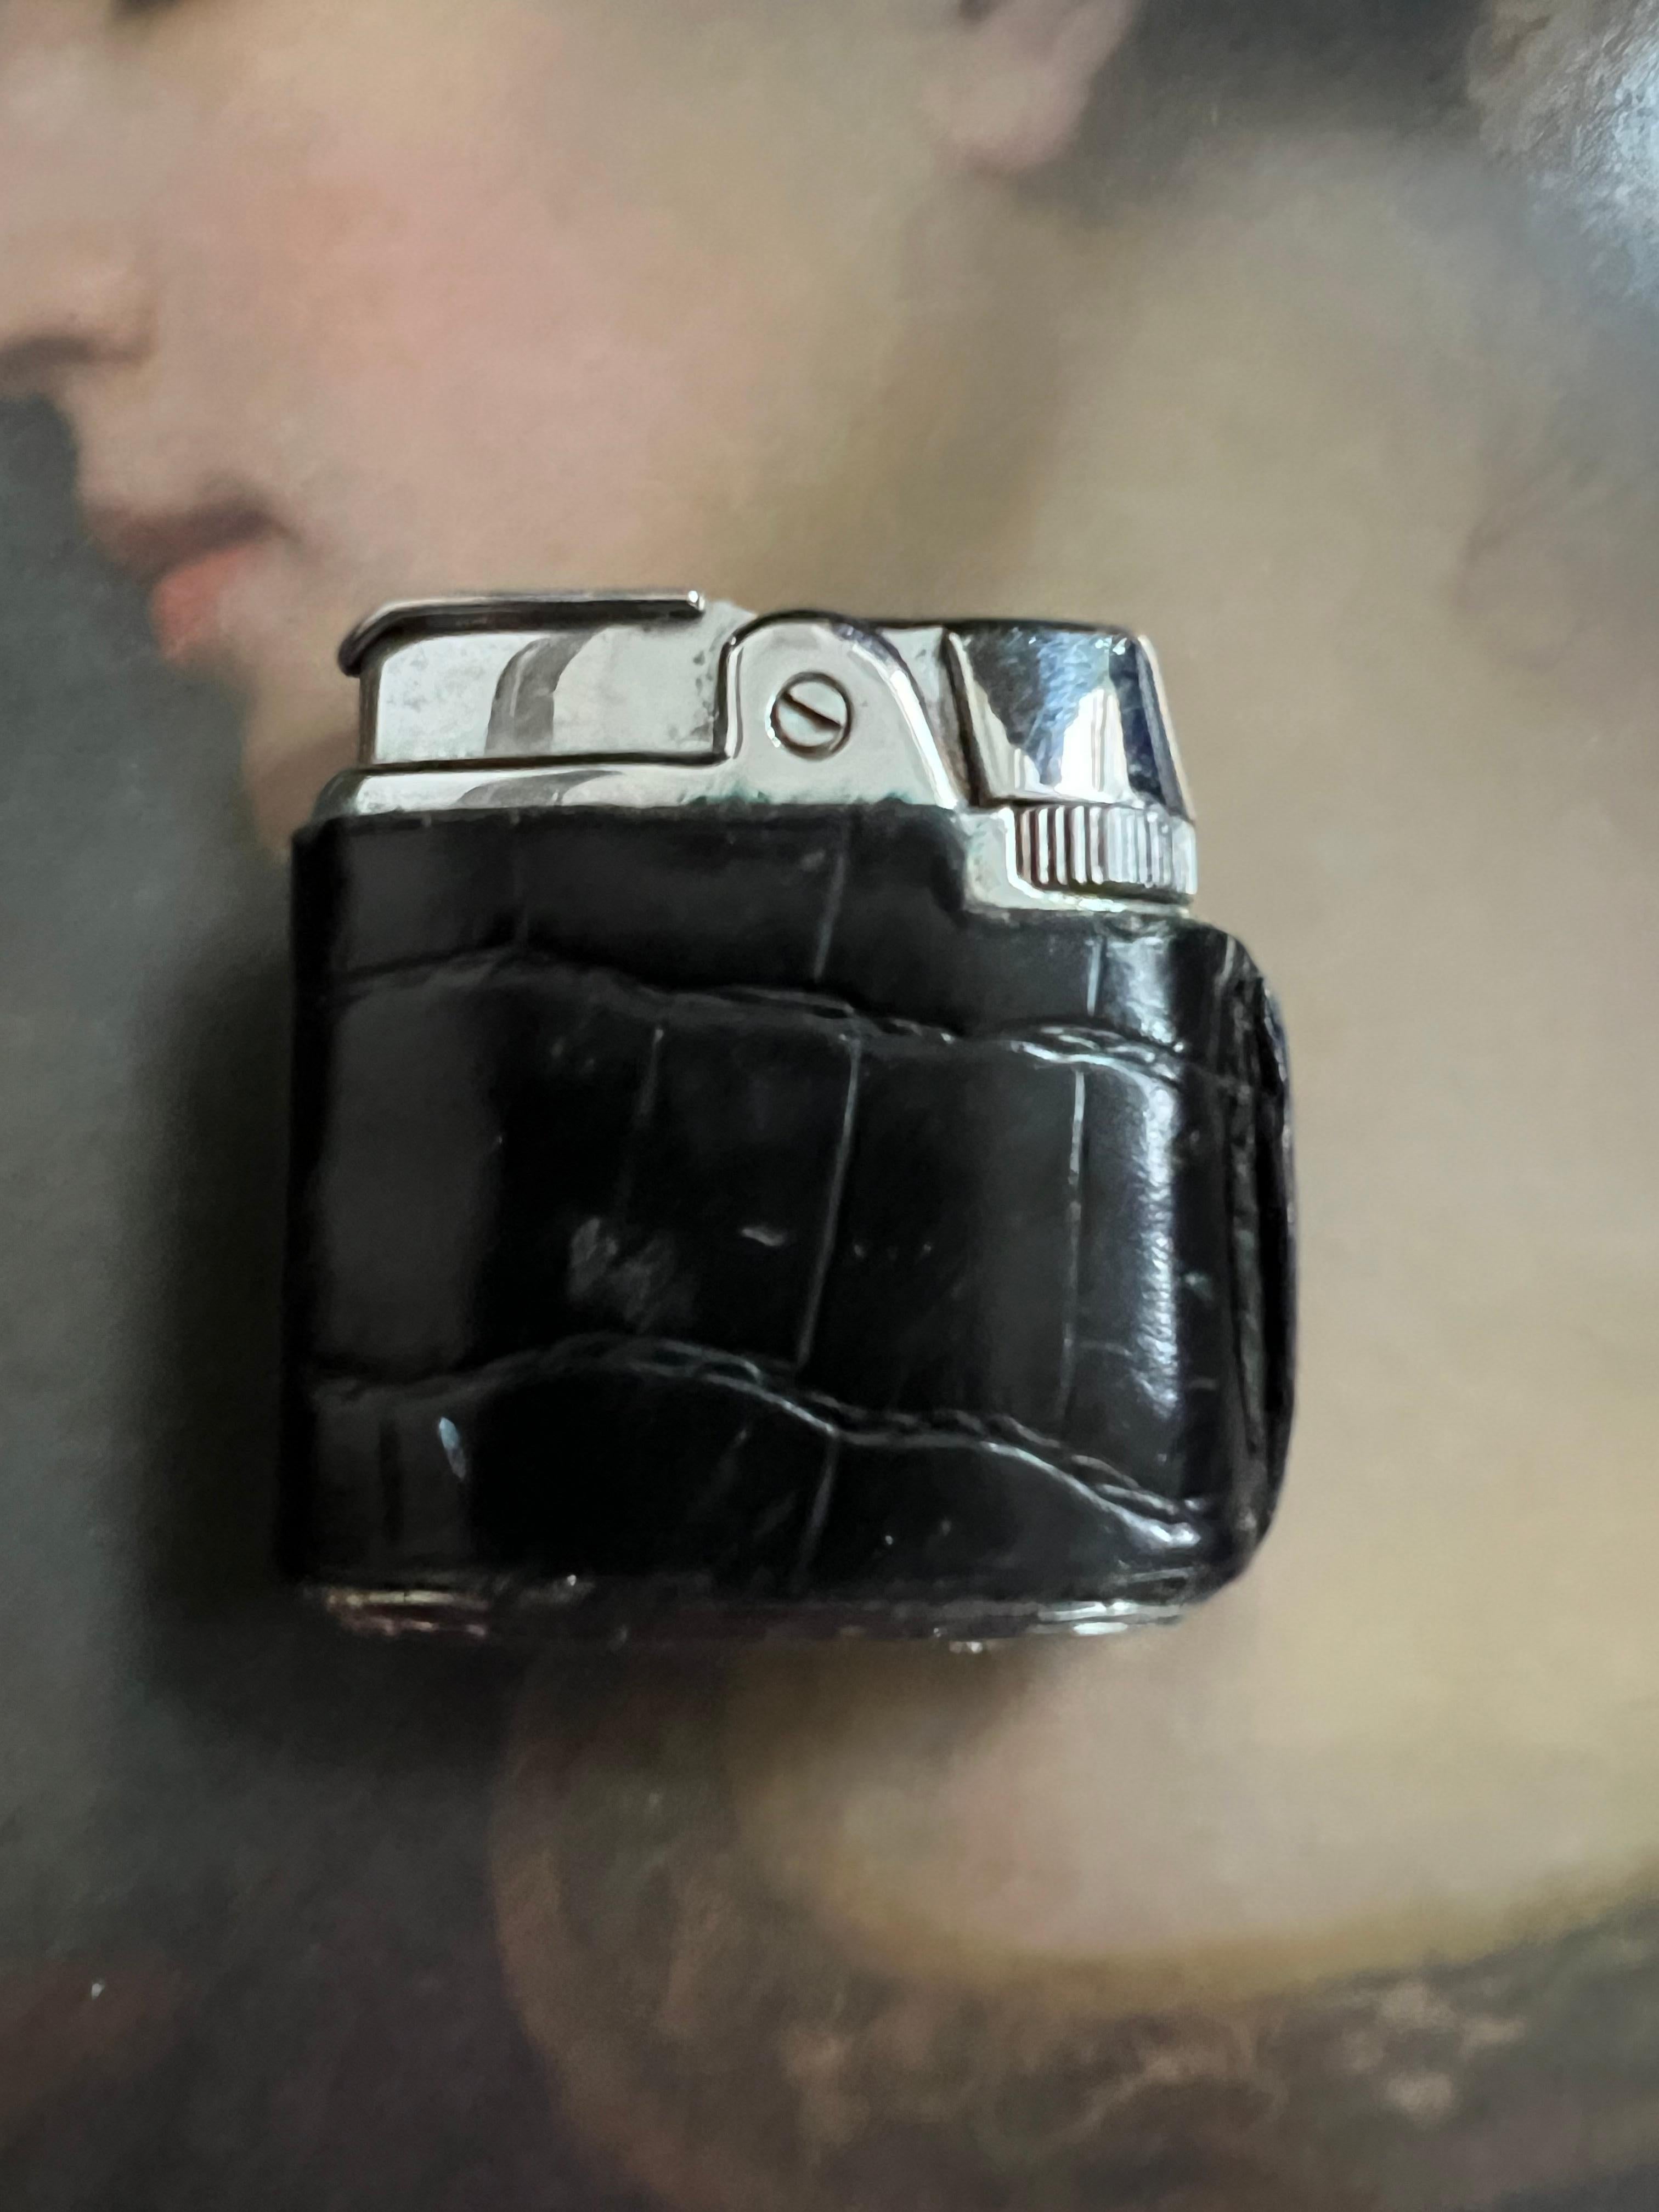 Ronson Black Bound lather lighter 
A lovely vintage Ronson gas leather bound lighter, it has been used and we would say no more than a few times as this is in super condition, leather all good, chrome finish, a super addition to any